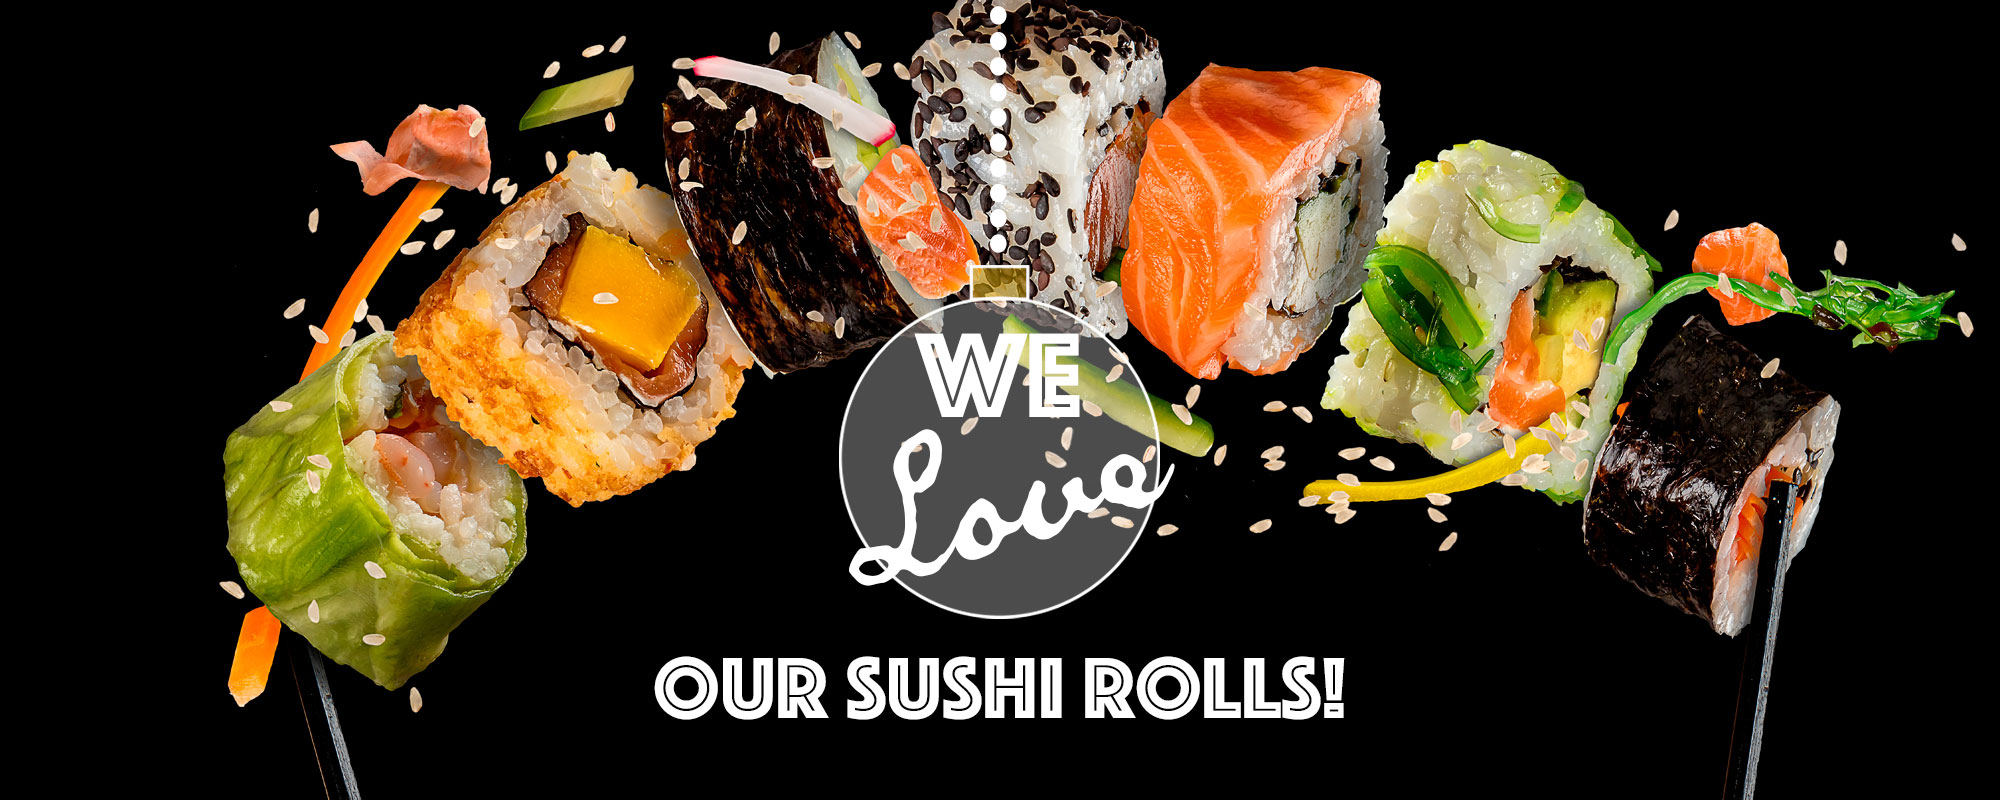 We love our sushi rolls!